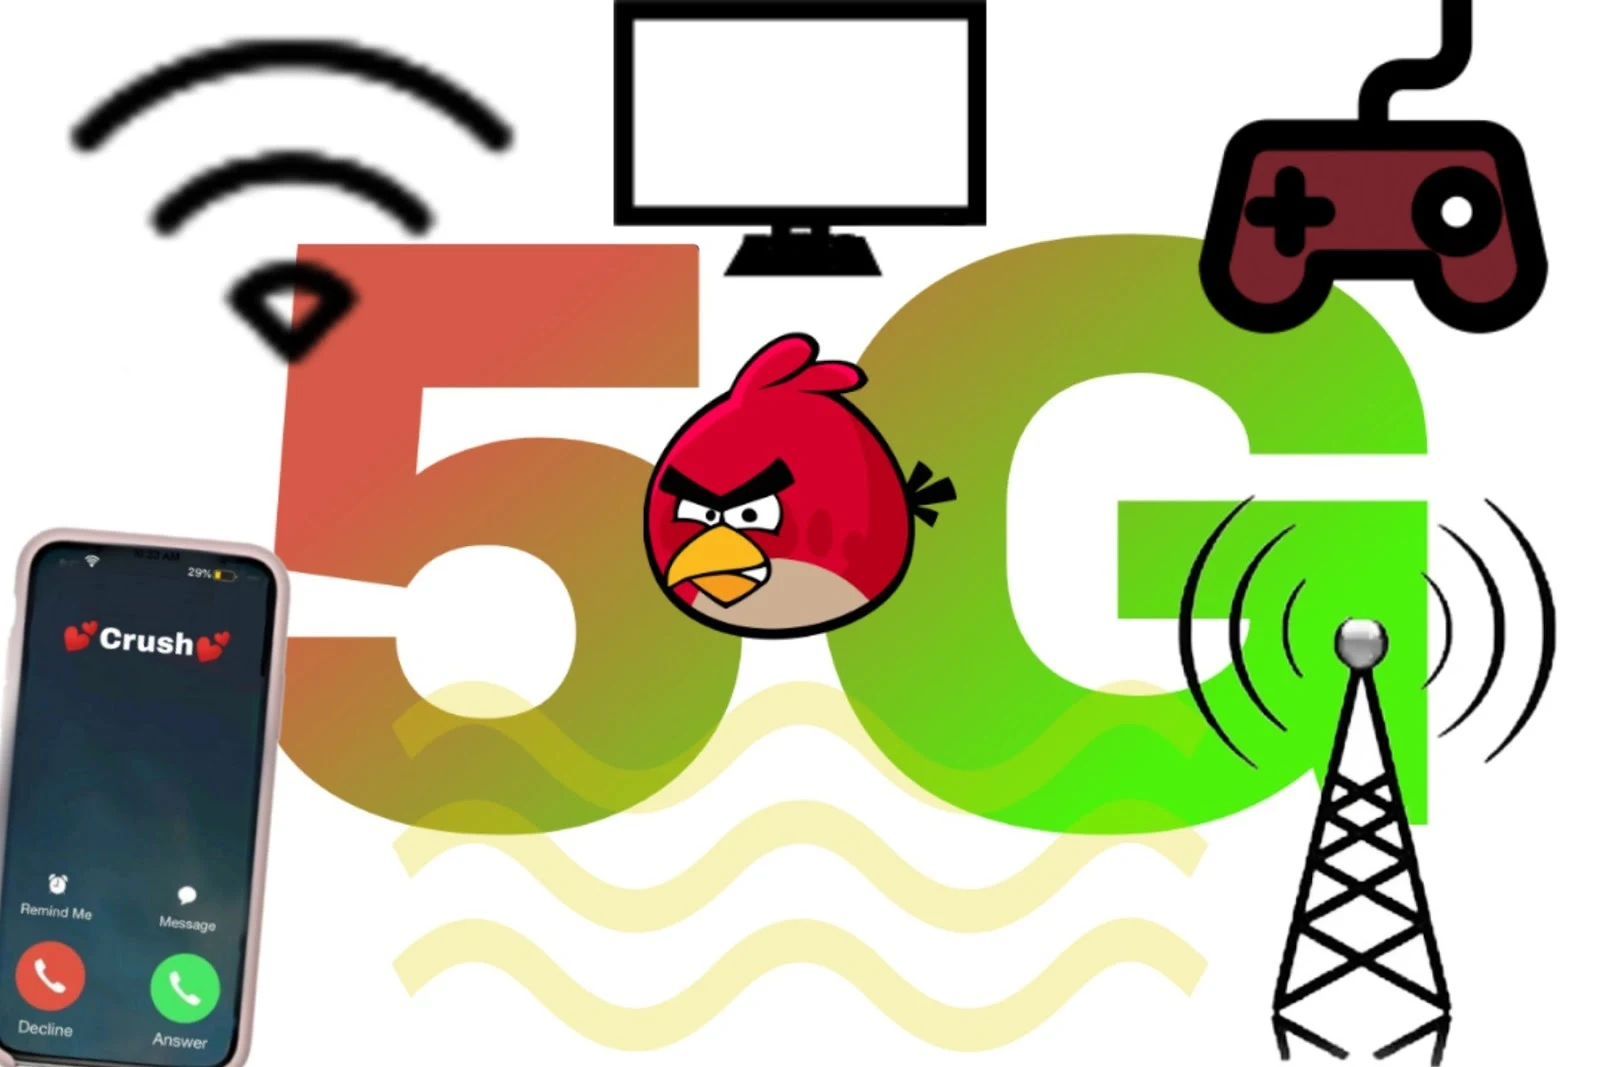 Does 5G cause death